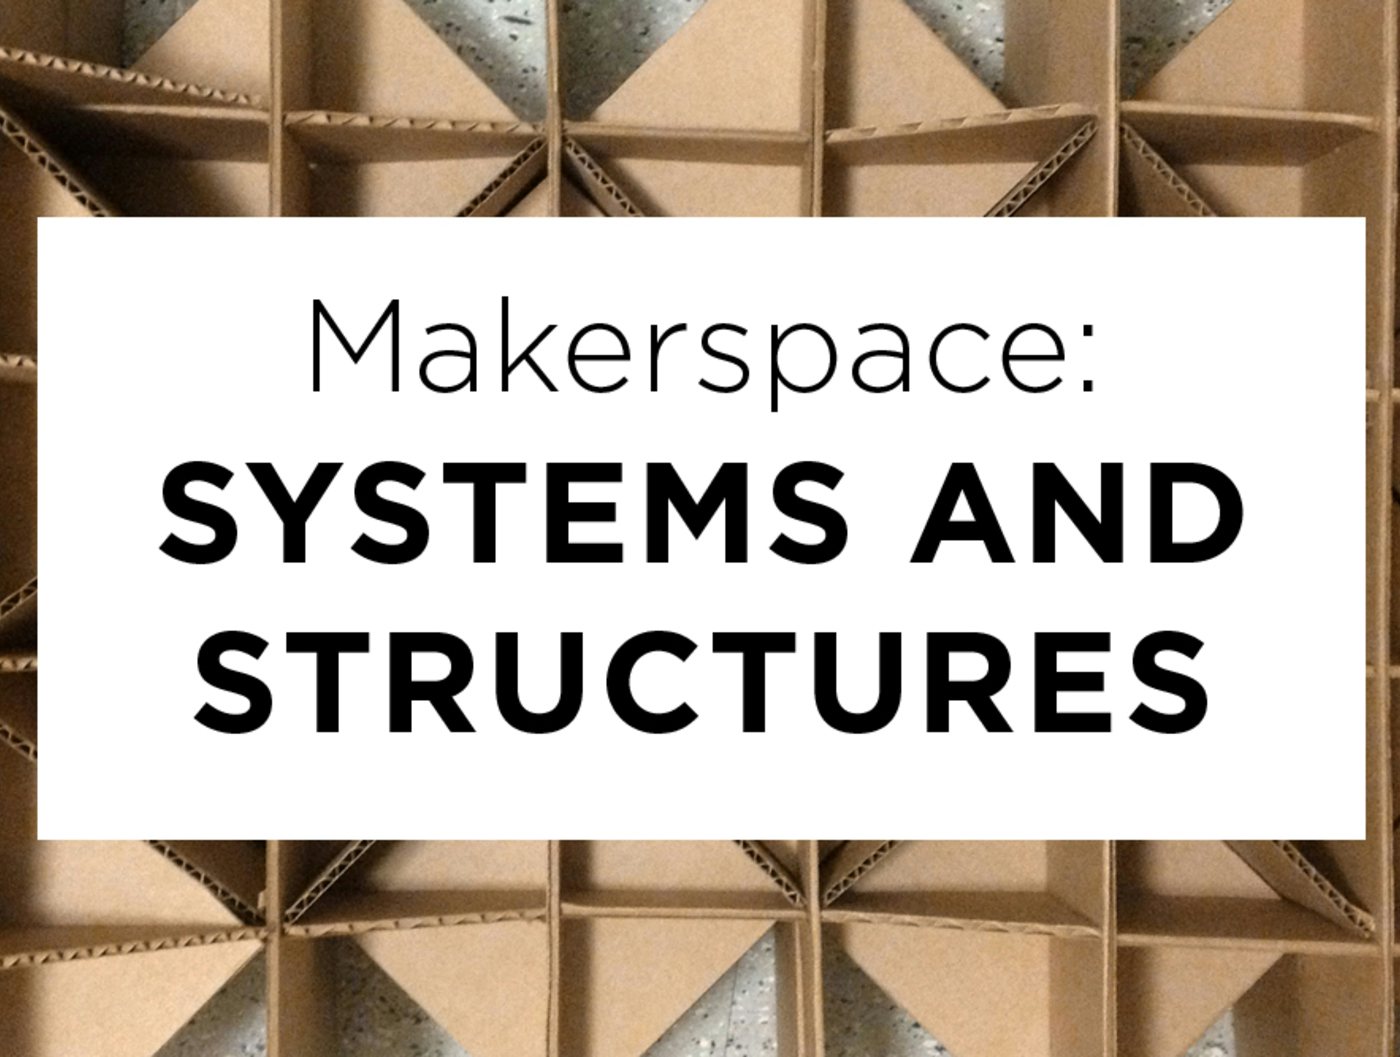 Makerspace: Systems and Structures